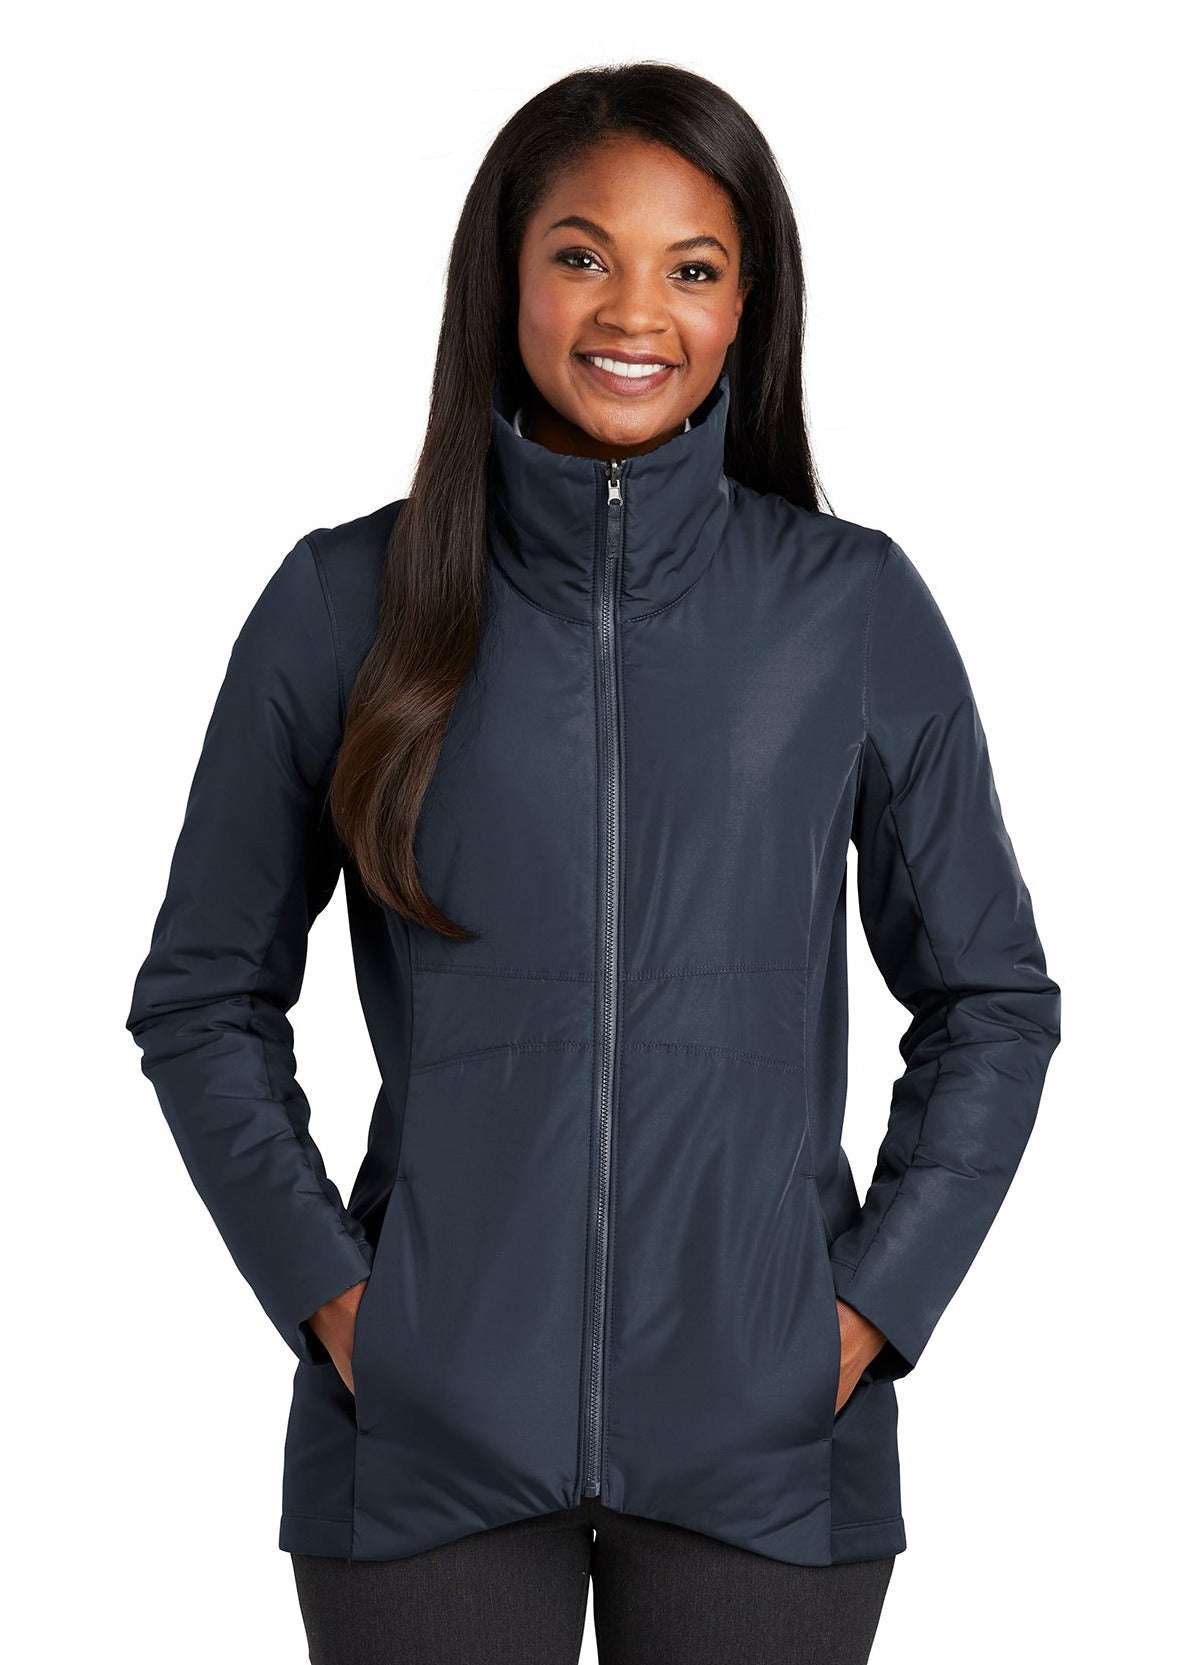 Port Authority ® Ladies Collective Insulated Jacket L902